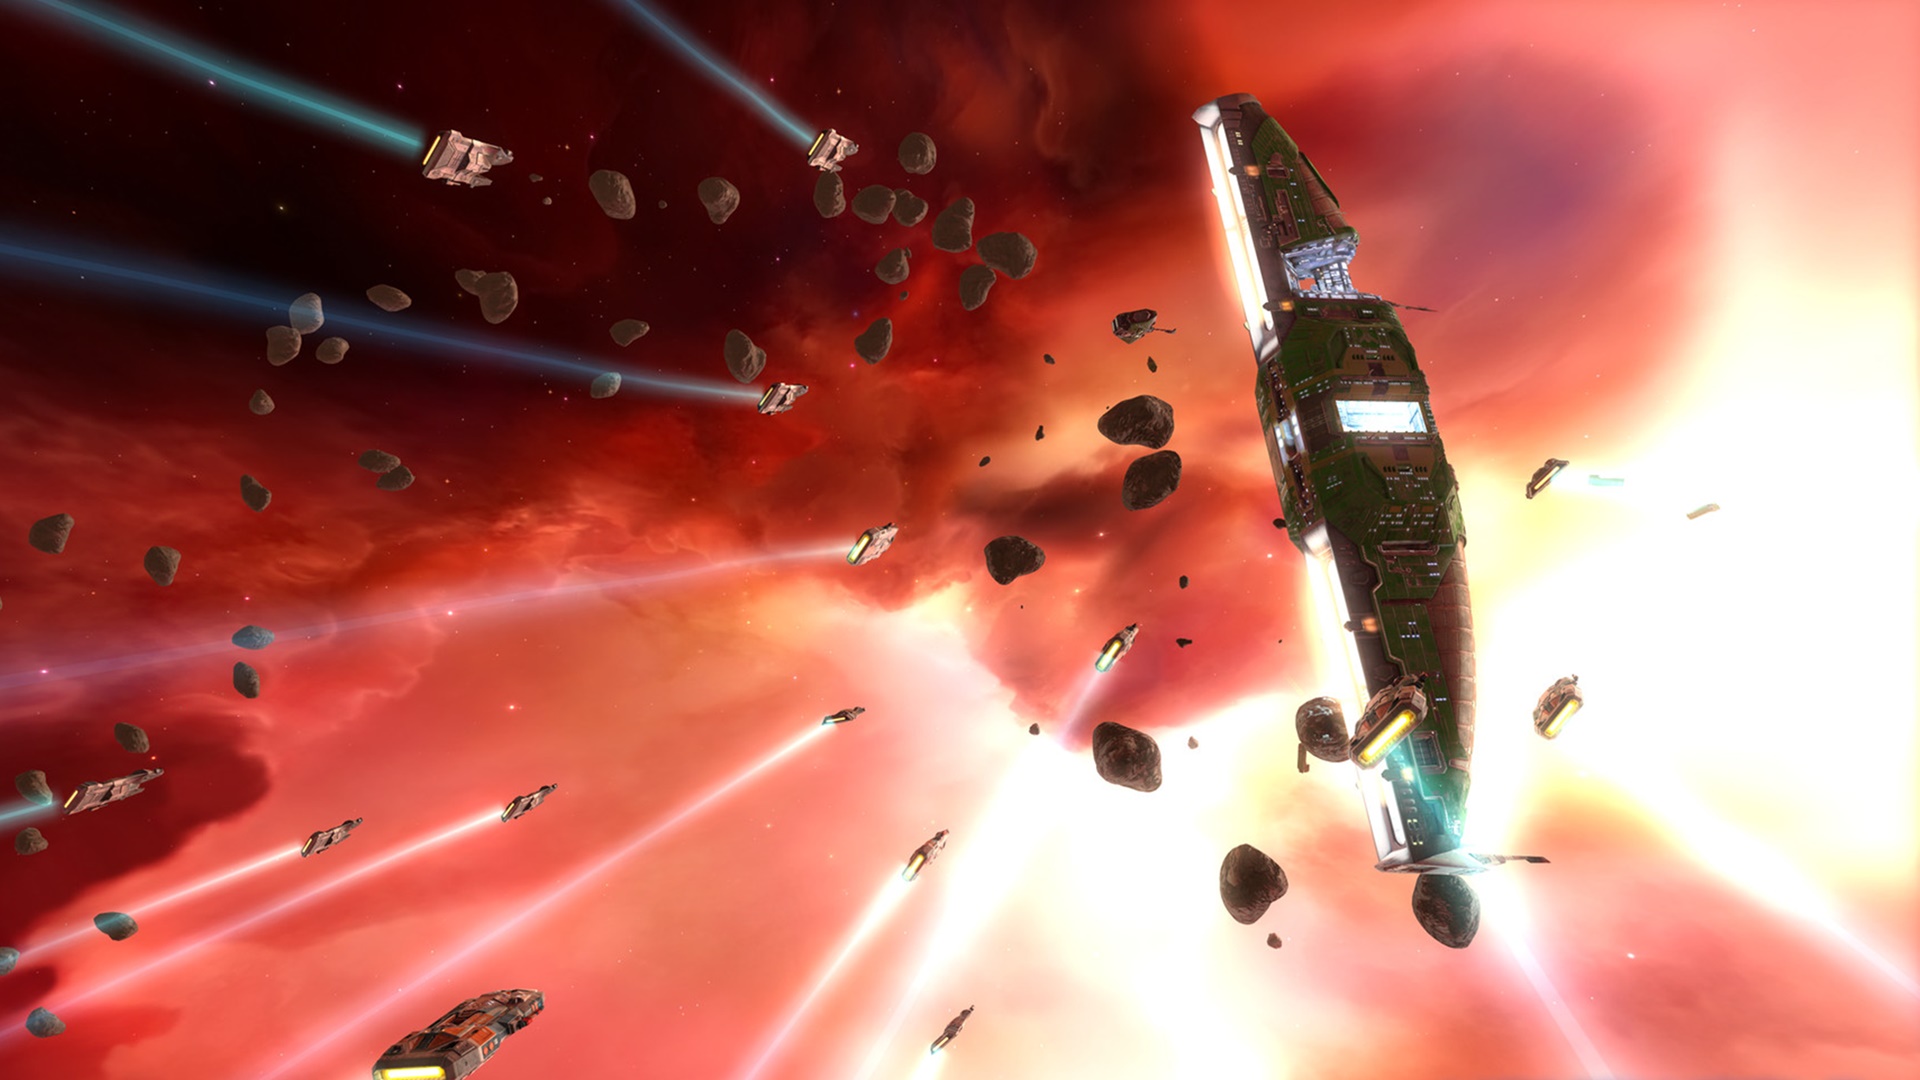 Best space games: Homeworld. Image shows a fleet of ships soaring through the depths of space.